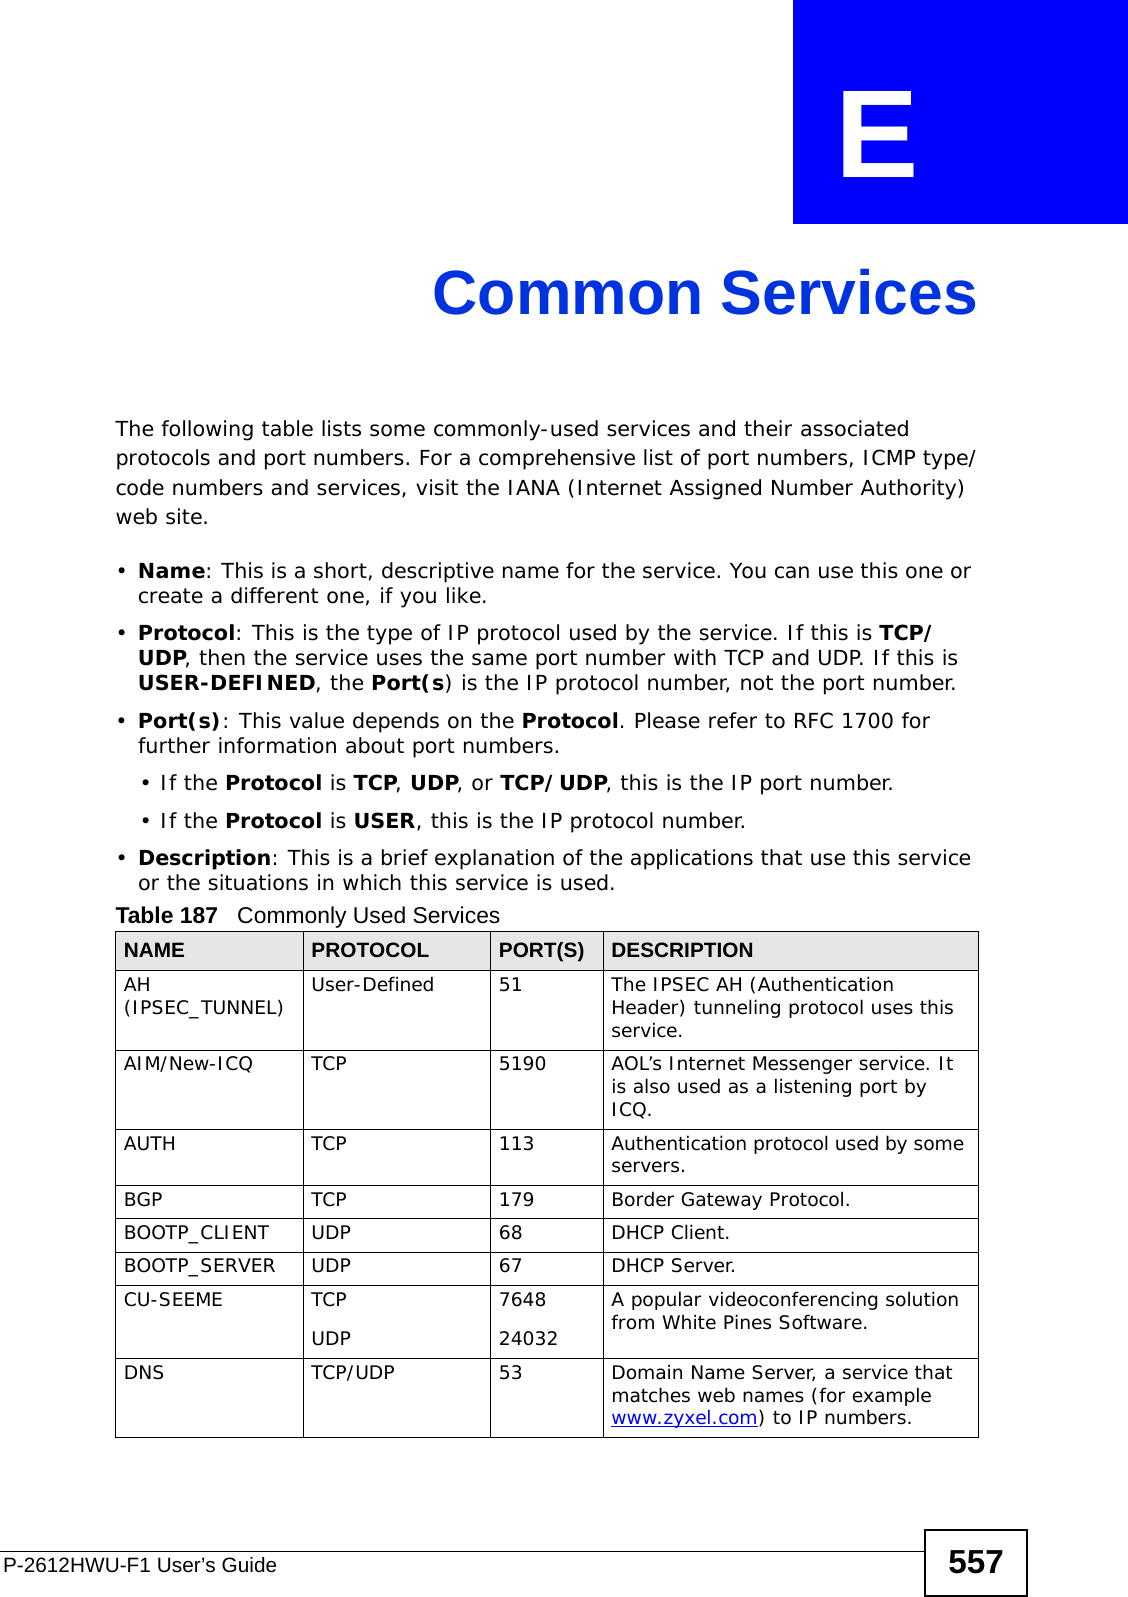 P-2612HWU-F1 User’s Guide 557APPENDIX  E Common ServicesThe following table lists some commonly-used services and their associated protocols and port numbers. For a comprehensive list of port numbers, ICMP type/code numbers and services, visit the IANA (Internet Assigned Number Authority) web site. •Name: This is a short, descriptive name for the service. You can use this one or create a different one, if you like.•Protocol: This is the type of IP protocol used by the service. If this is TCP/UDP, then the service uses the same port number with TCP and UDP. If this is USER-DEFINED, the Port(s) is the IP protocol number, not the port number.•Port(s): This value depends on the Protocol. Please refer to RFC 1700 for further information about port numbers.•If the Protocol is TCP, UDP, or TCP/UDP, this is the IP port number.•If the Protocol is USER, this is the IP protocol number.•Description: This is a brief explanation of the applications that use this service or the situations in which this service is used.Table 187   Commonly Used ServicesNAME PROTOCOL PORT(S) DESCRIPTIONAH (IPSEC_TUNNEL) User-Defined 51 The IPSEC AH (Authentication Header) tunneling protocol uses this service.AIM/New-ICQ TCP 5190 AOL’s Internet Messenger service. It is also used as a listening port by ICQ.AUTH TCP 113 Authentication protocol used by some servers.BGP TCP 179 Border Gateway Protocol.BOOTP_CLIENT UDP 68 DHCP Client.BOOTP_SERVER UDP 67 DHCP Server.CU-SEEME TCPUDP764824032A popular videoconferencing solution from White Pines Software.DNS TCP/UDP 53 Domain Name Server, a service that matches web names (for example www.zyxel.com) to IP numbers.